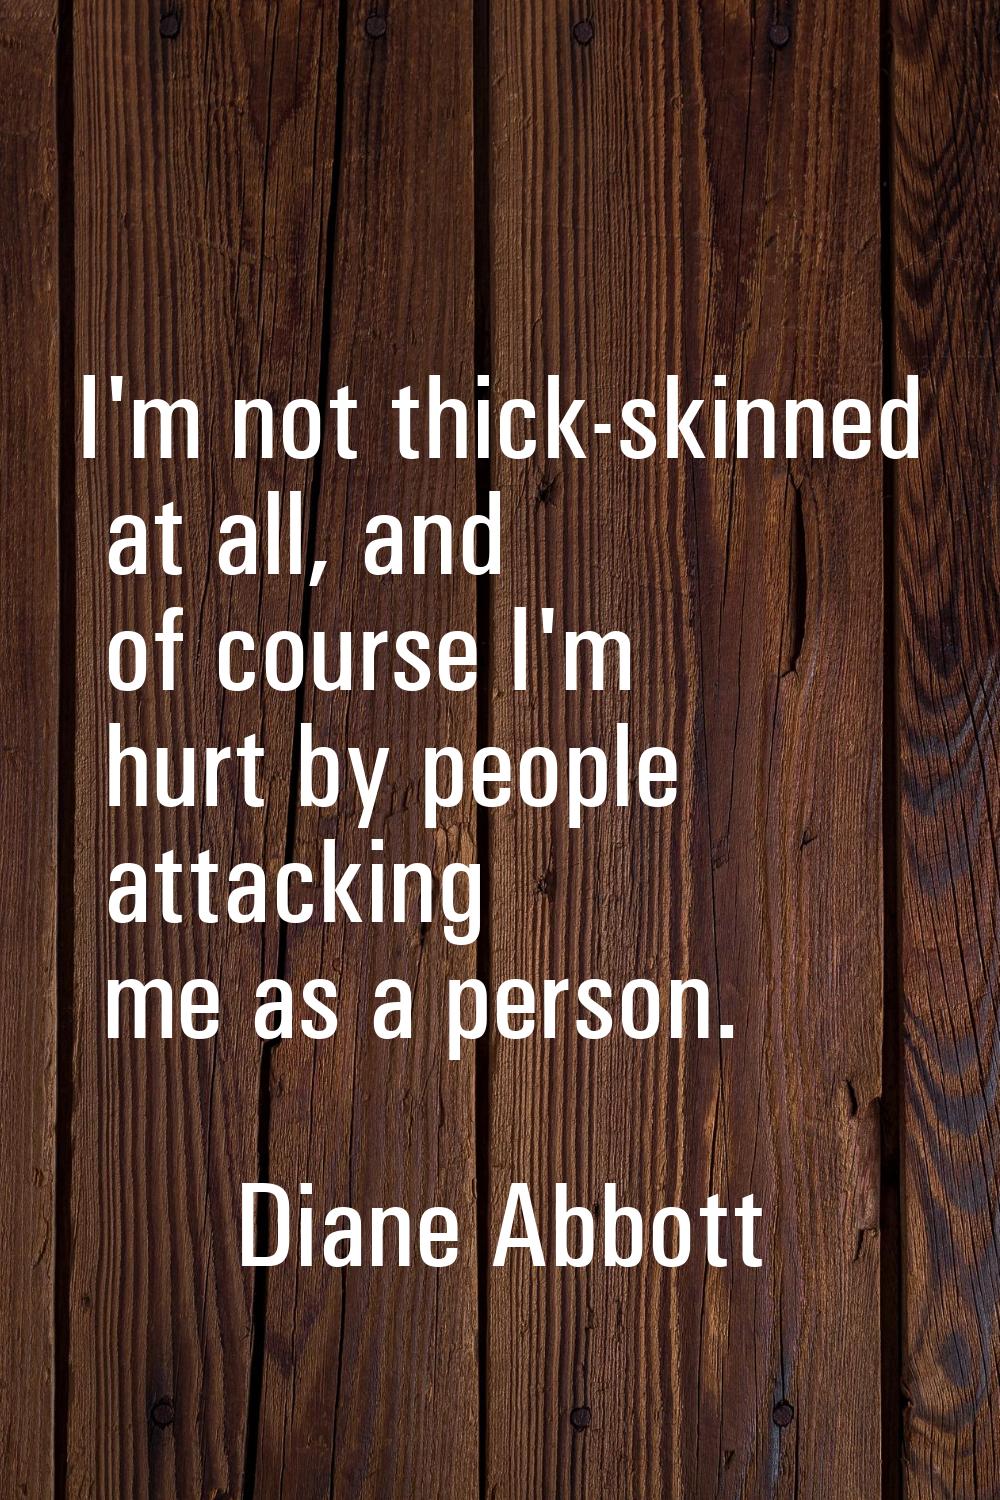 I'm not thick-skinned at all, and of course I'm hurt by people attacking me as a person.